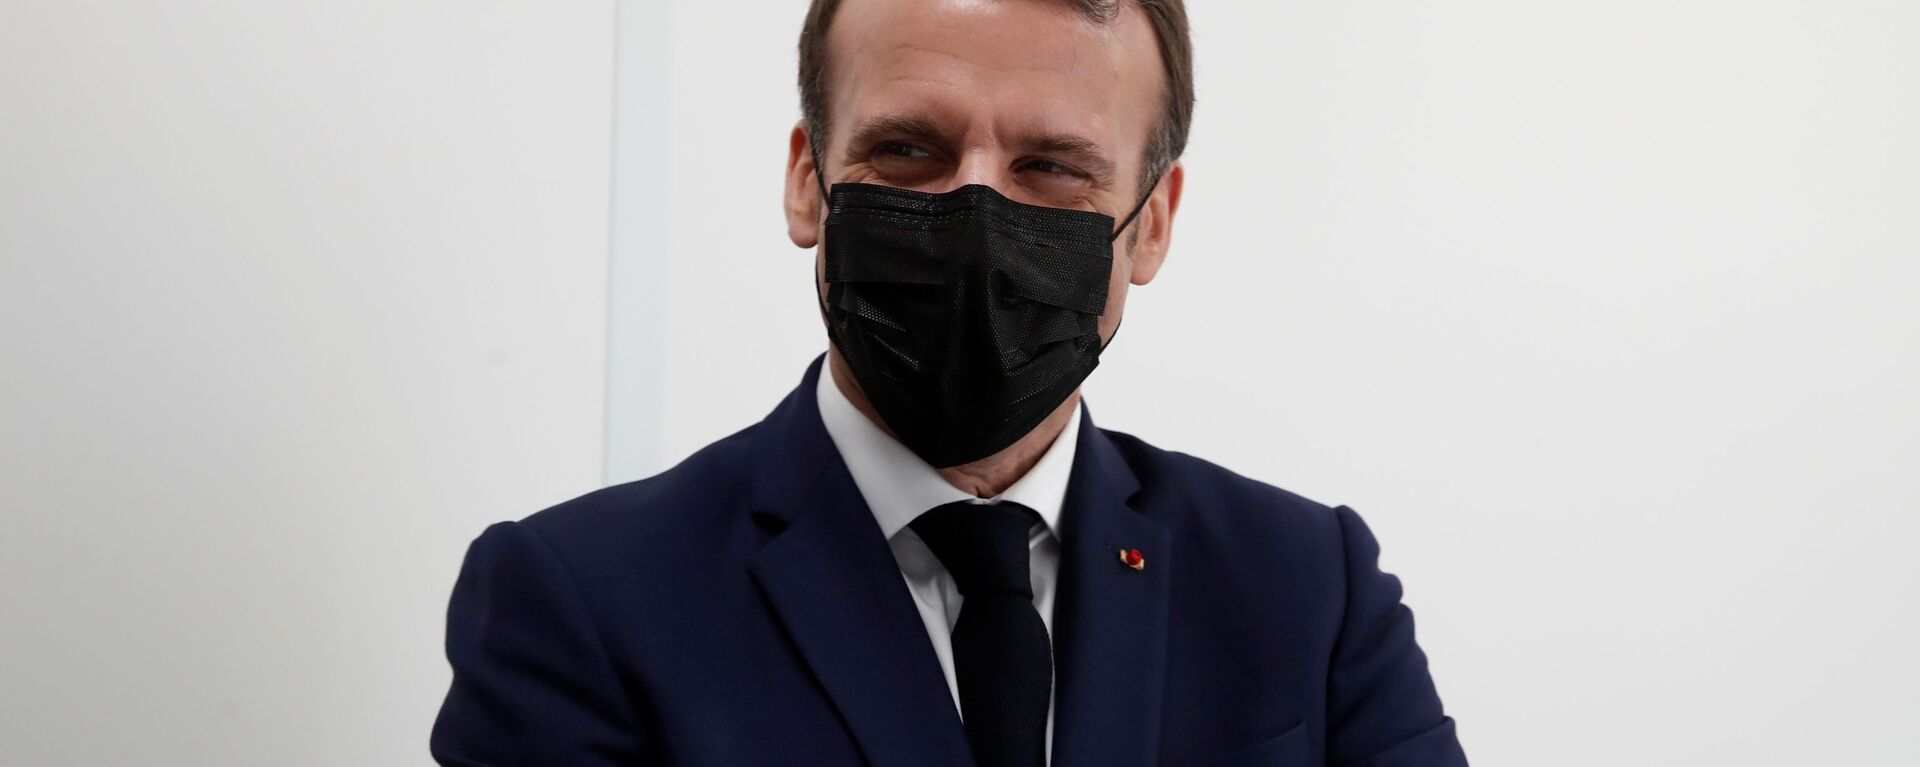 French President Emmanuel Macron, wearing a protective face mask, visits a coronavirus disease (COVID-19) vaccination center at the Caisse Primaire d'Assurance Maladie (France's local health insurance funds - CPAM) in Bobigny near Paris as part of the COVID-19 vaccination campaign in France, March 1, 2021. - Sputnik International, 1920, 11.01.2022